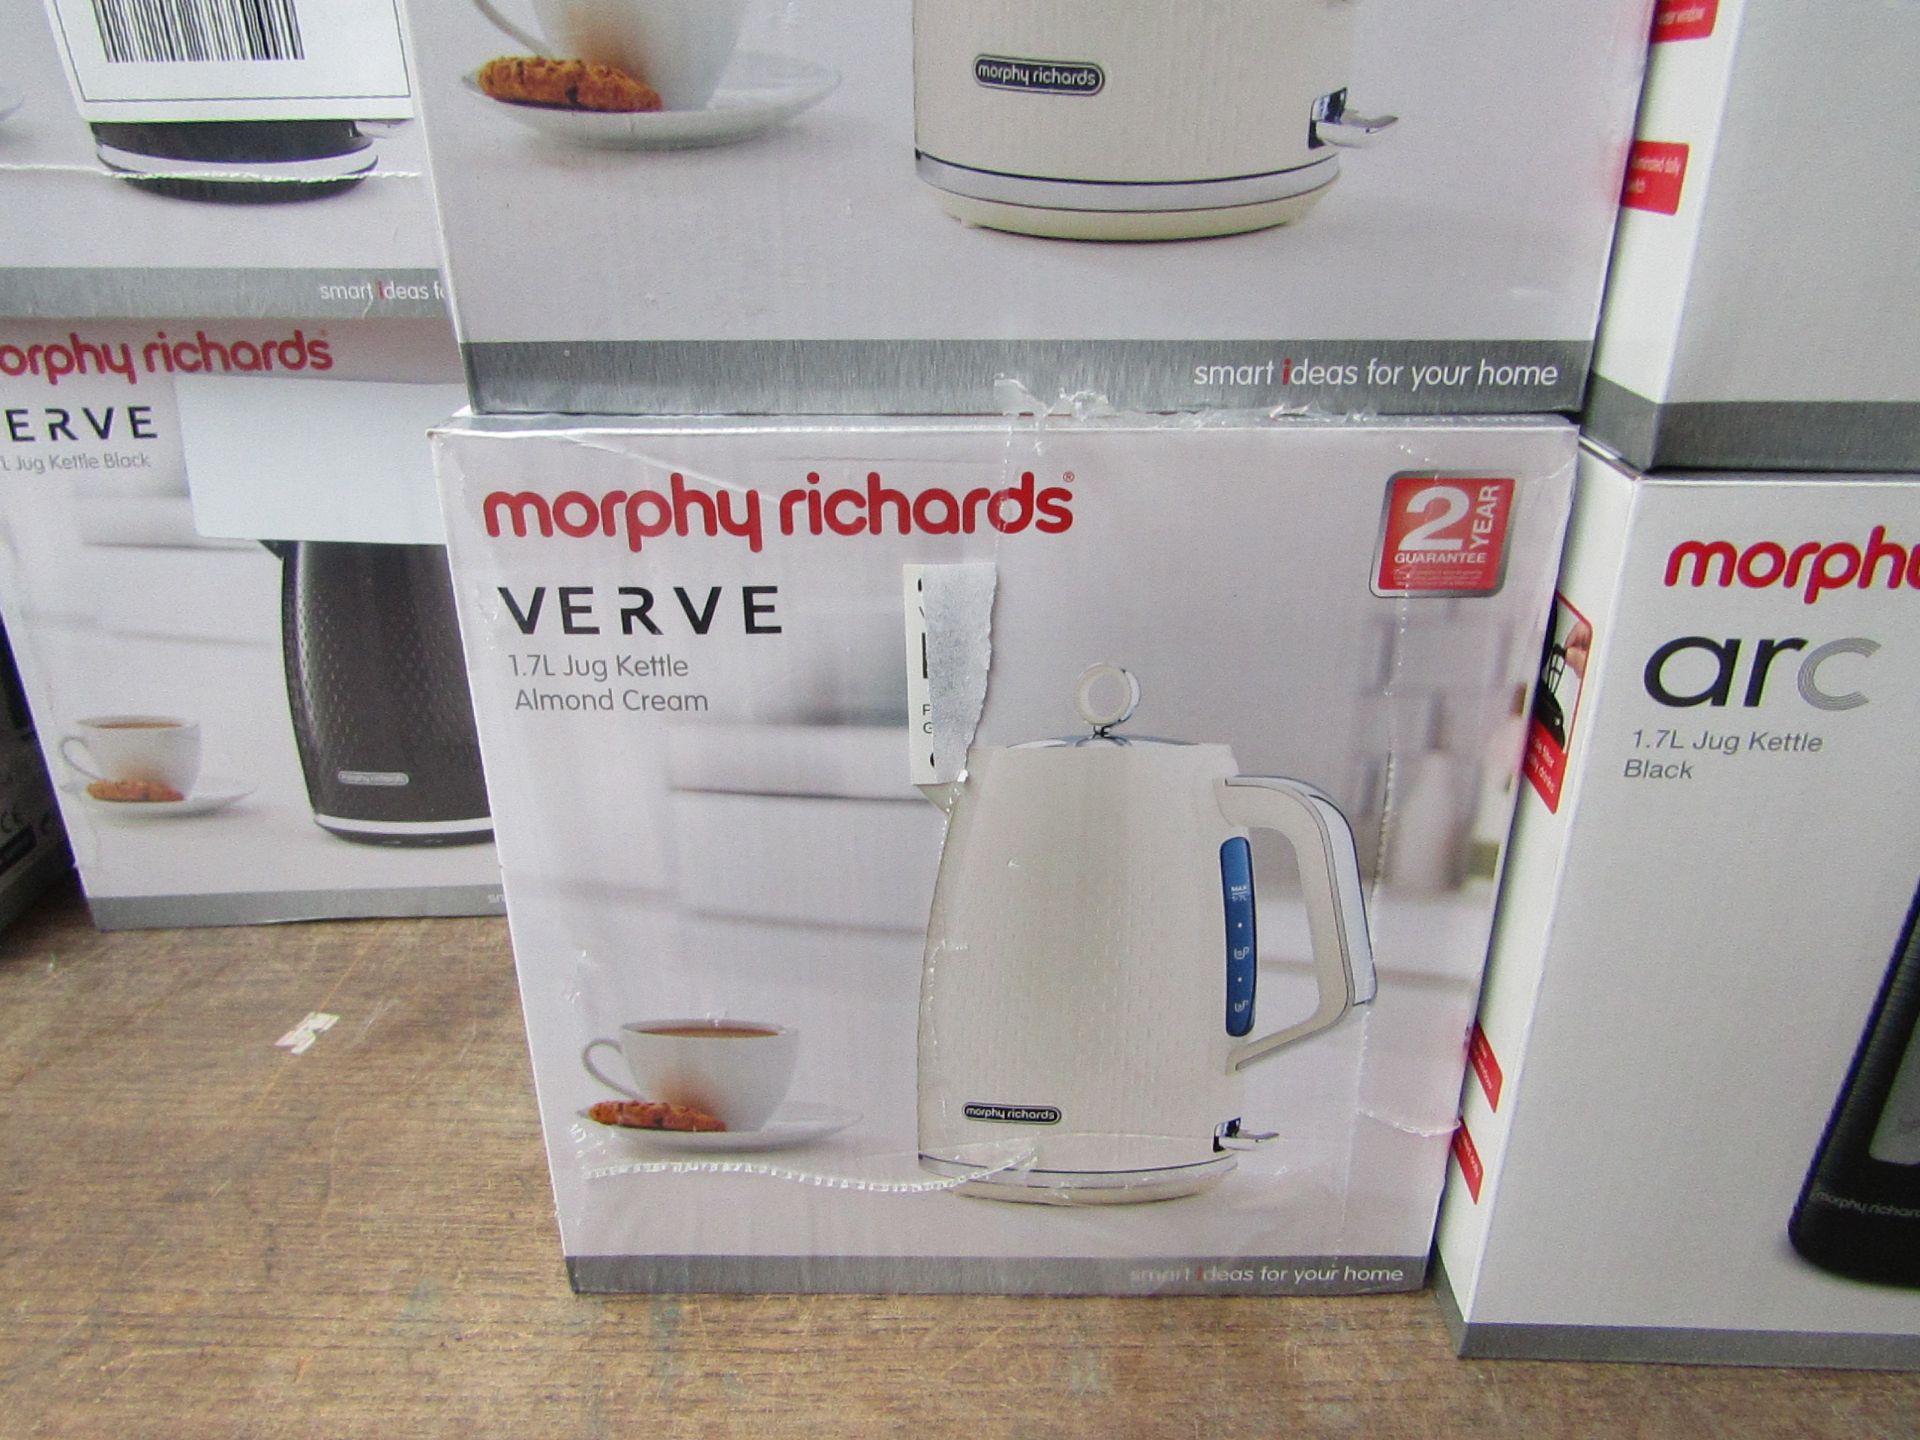 Morphy Richards Verve 1.7L jug cream kettle, brand new and boxed. RRP £42.99